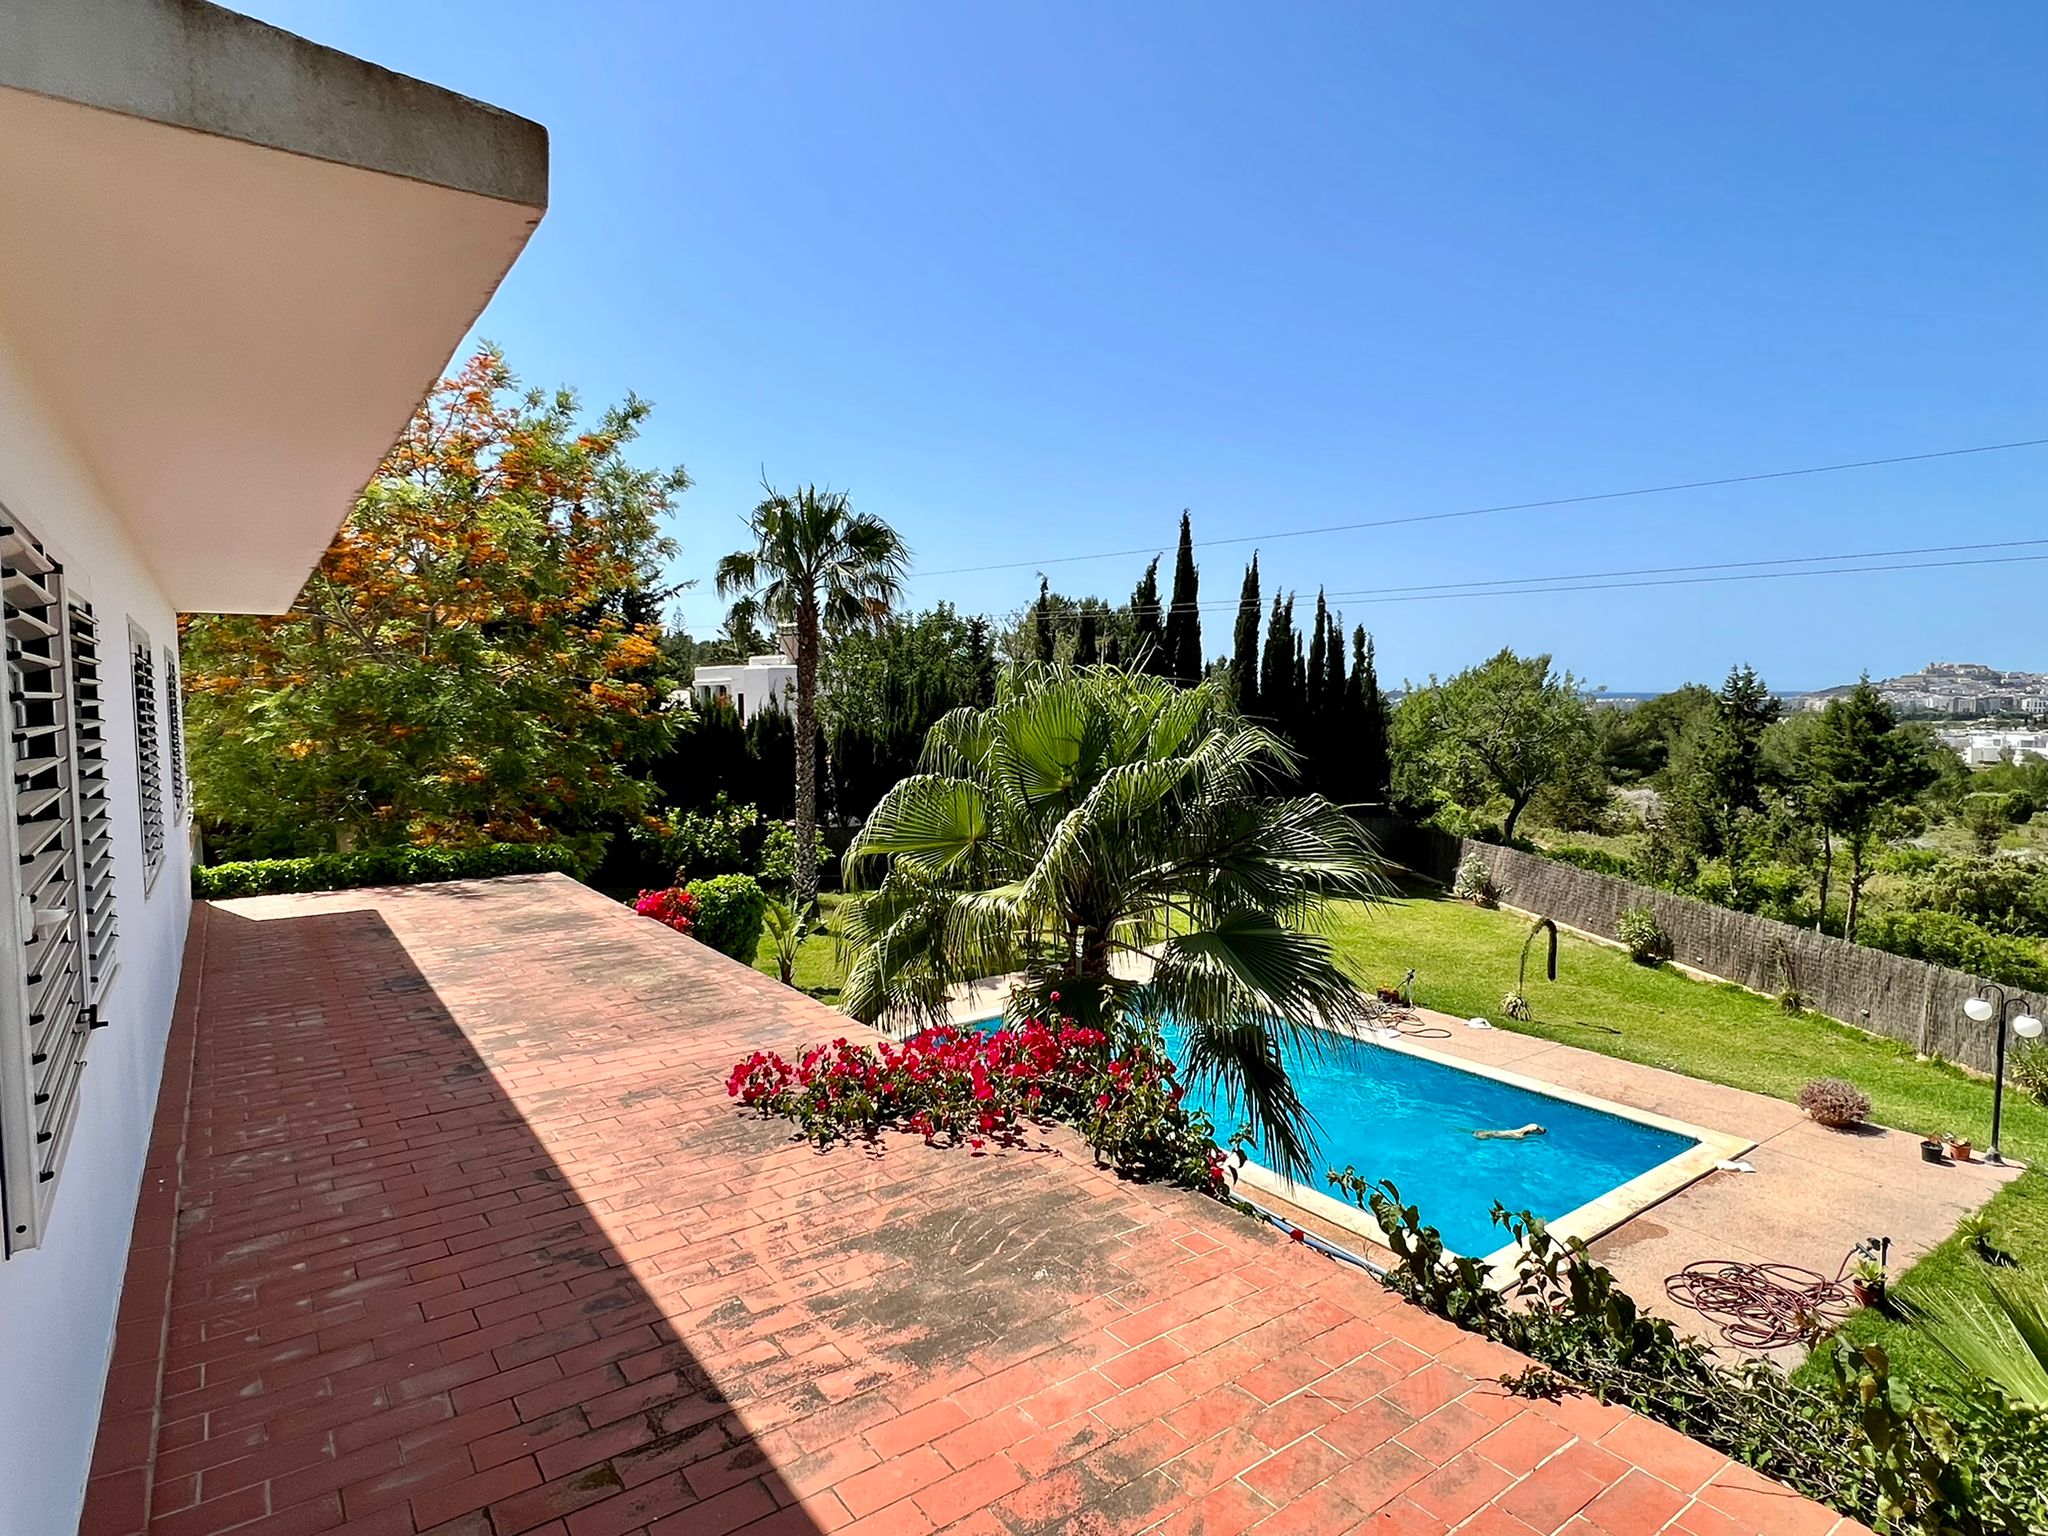 Nice villa with panoramic views to the country side up to D'Alt Villa in Jesus